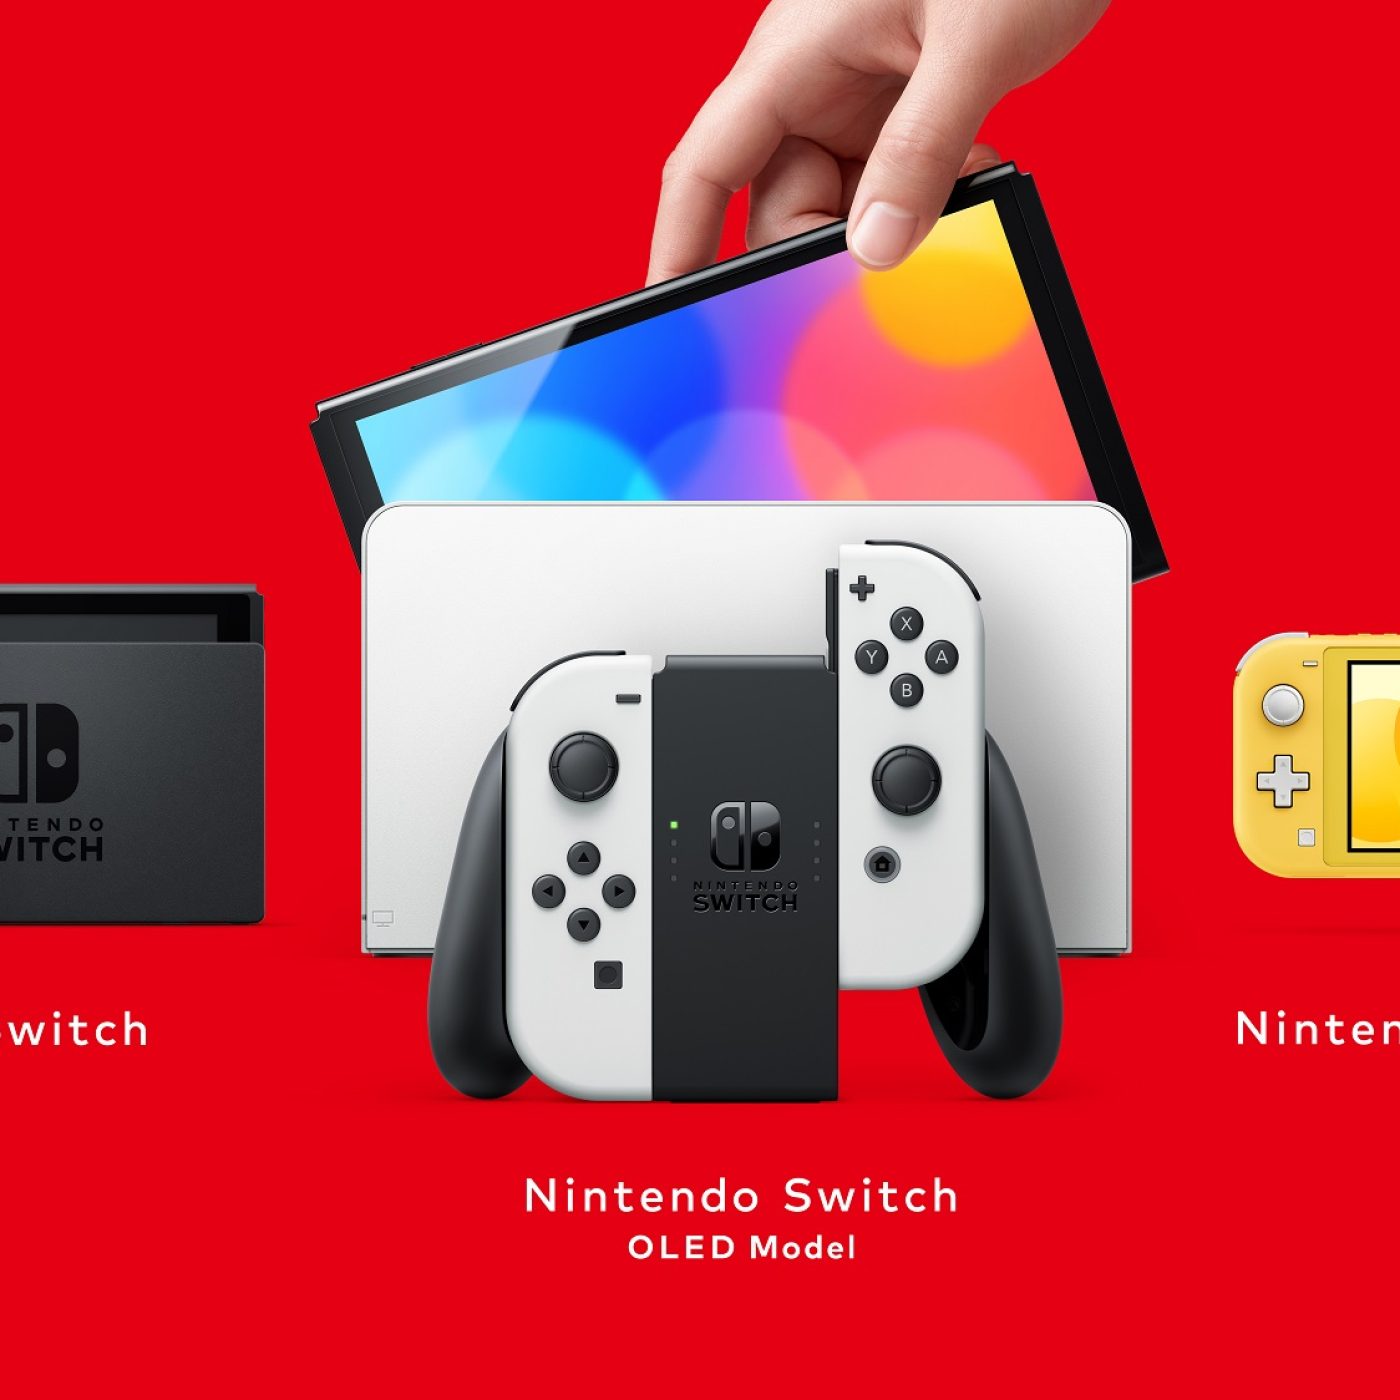 Reports suggest that Nintendo will revert back to an LCD display in its  next-gen Switch mobile gaming console